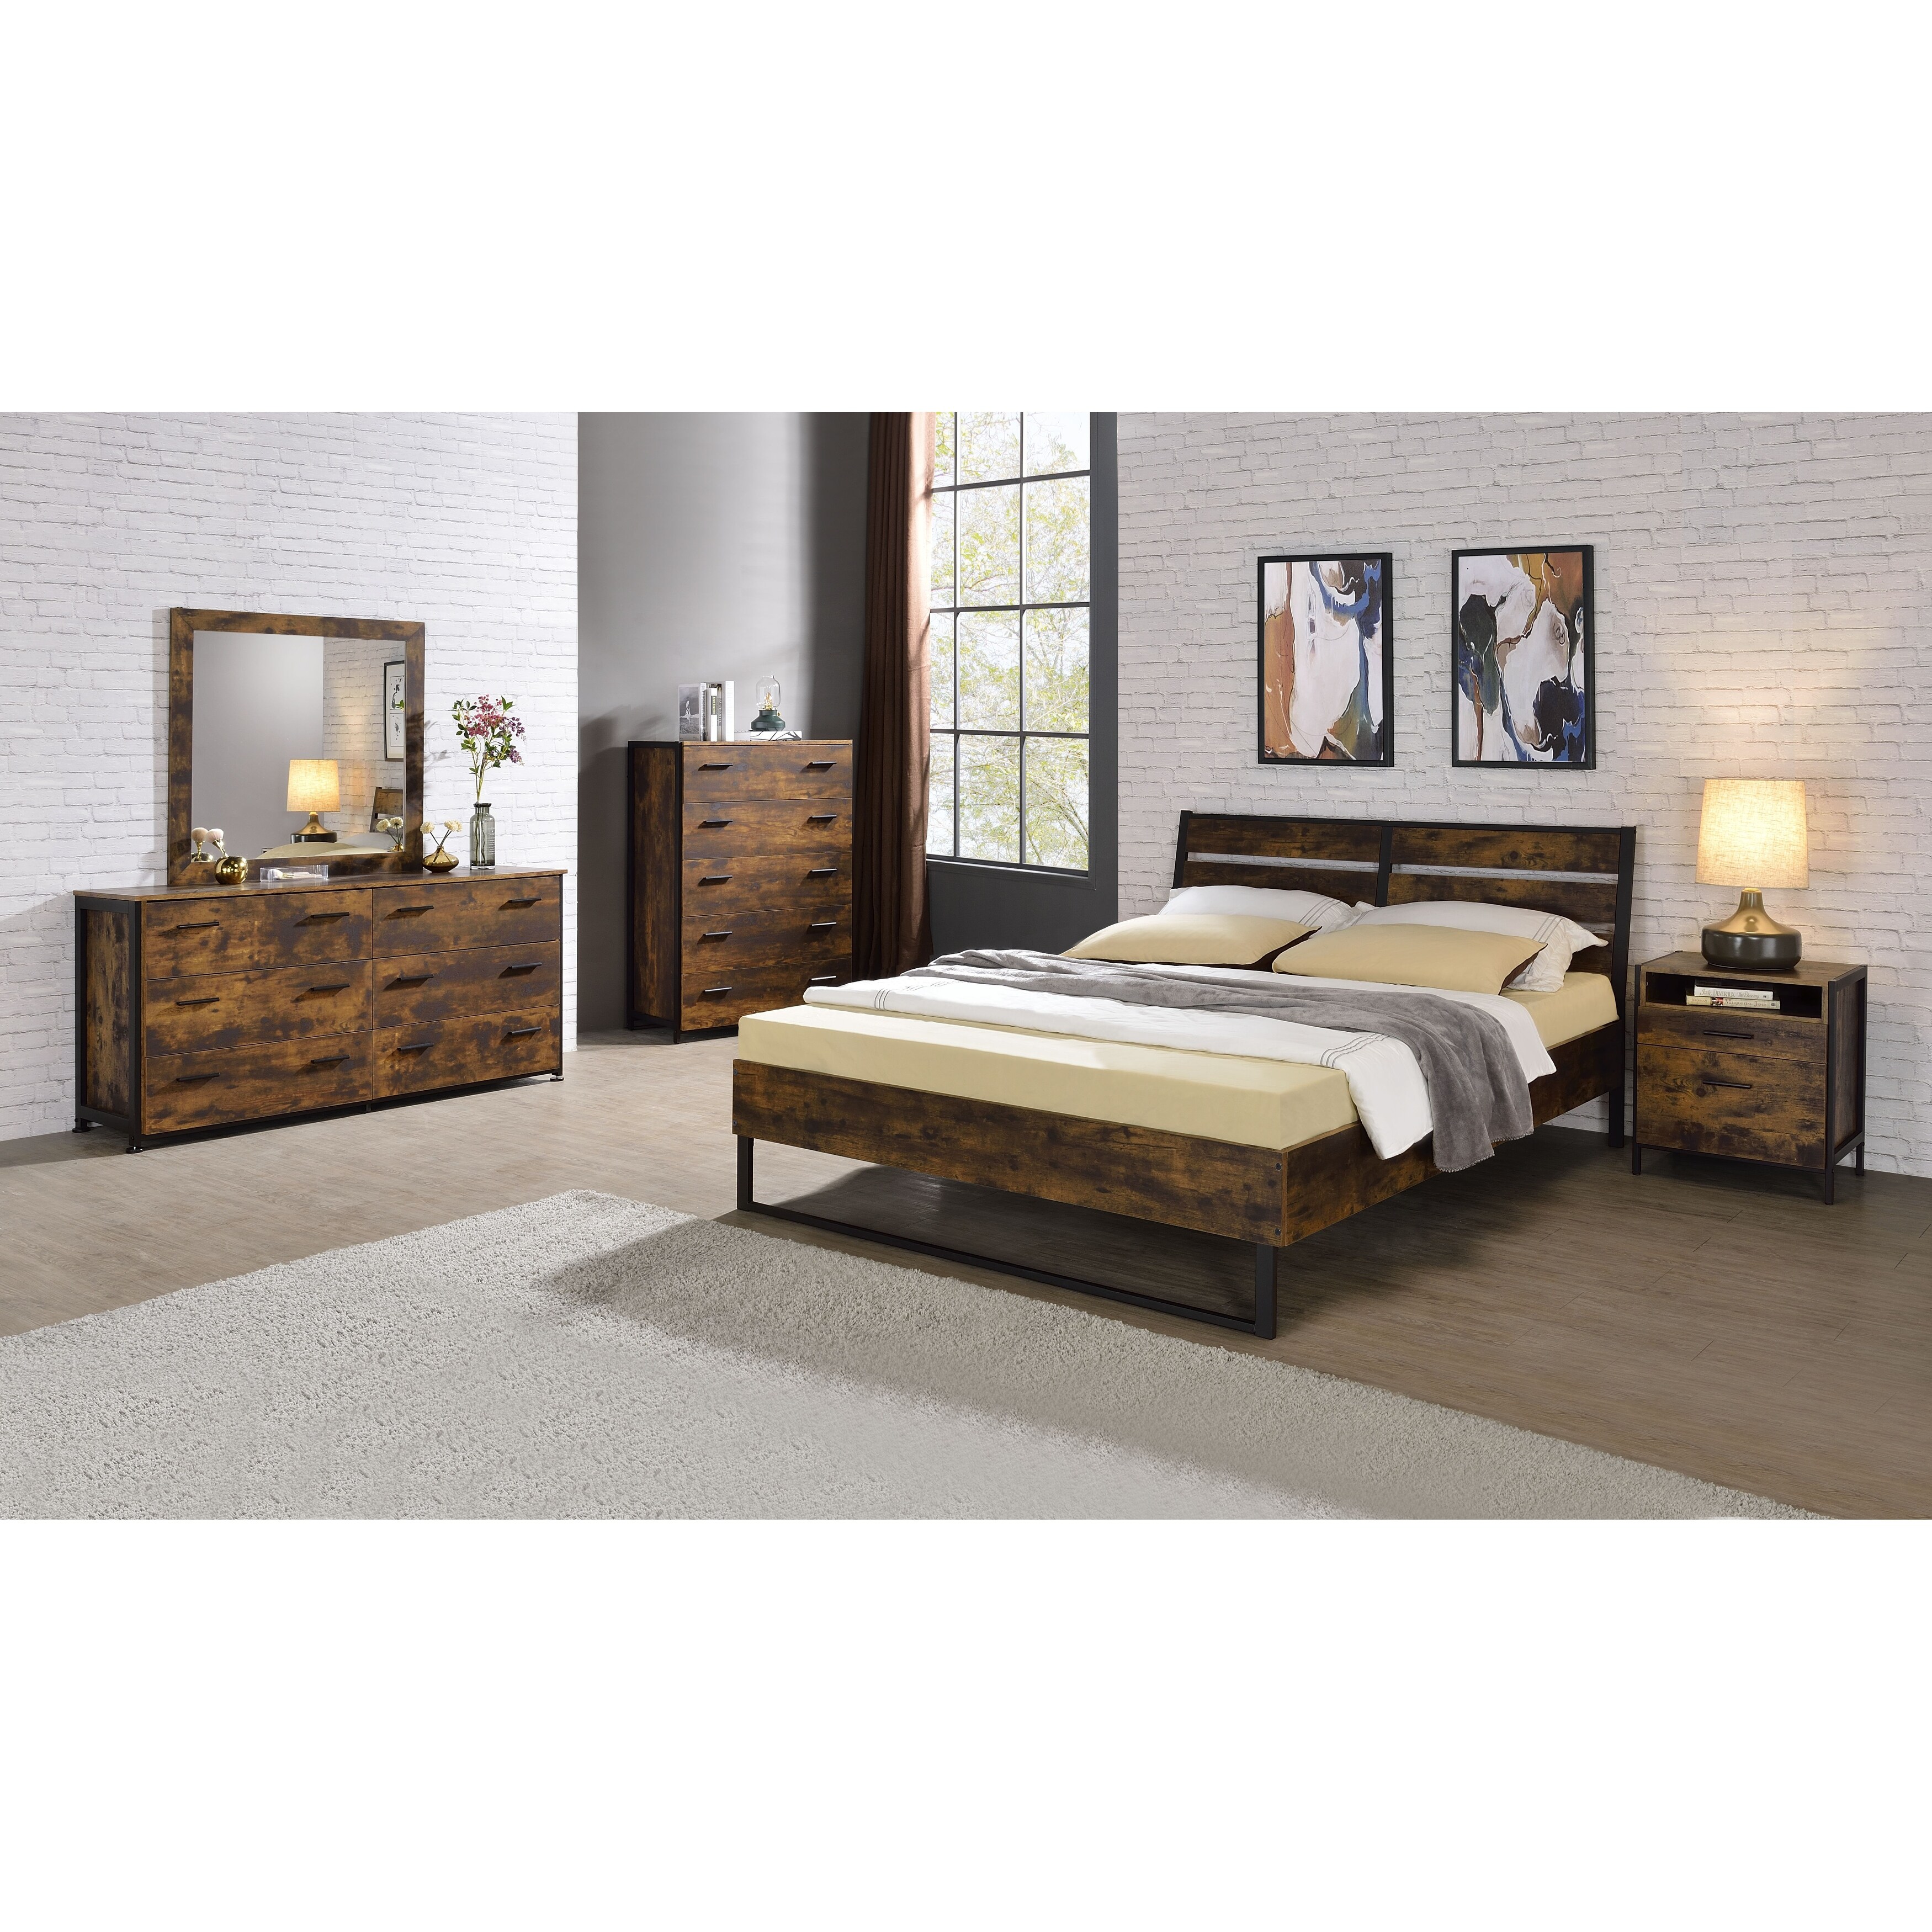  Acme Louis Philippe Eastern King Bed in Cherry : Home & Kitchen